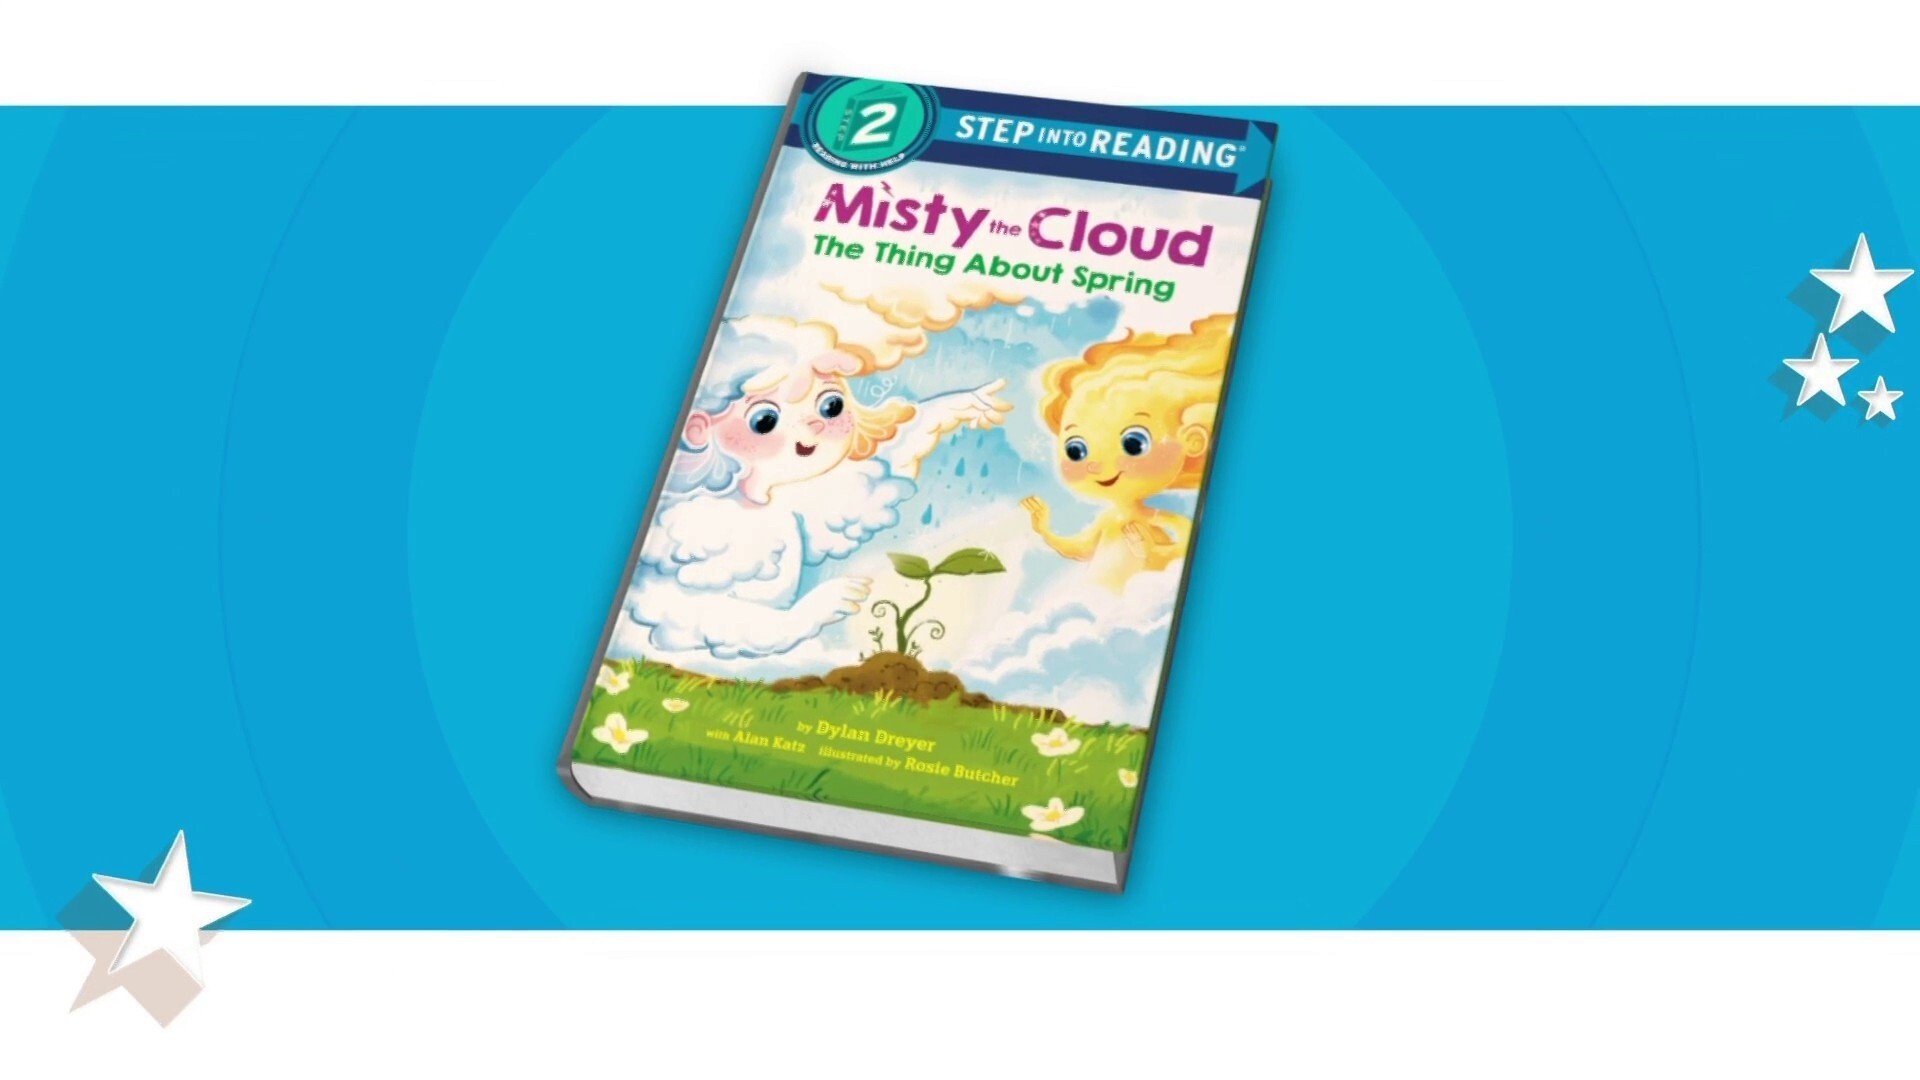 See the cover of Dylan Dreyer's latest 'Misty the Cloud' book